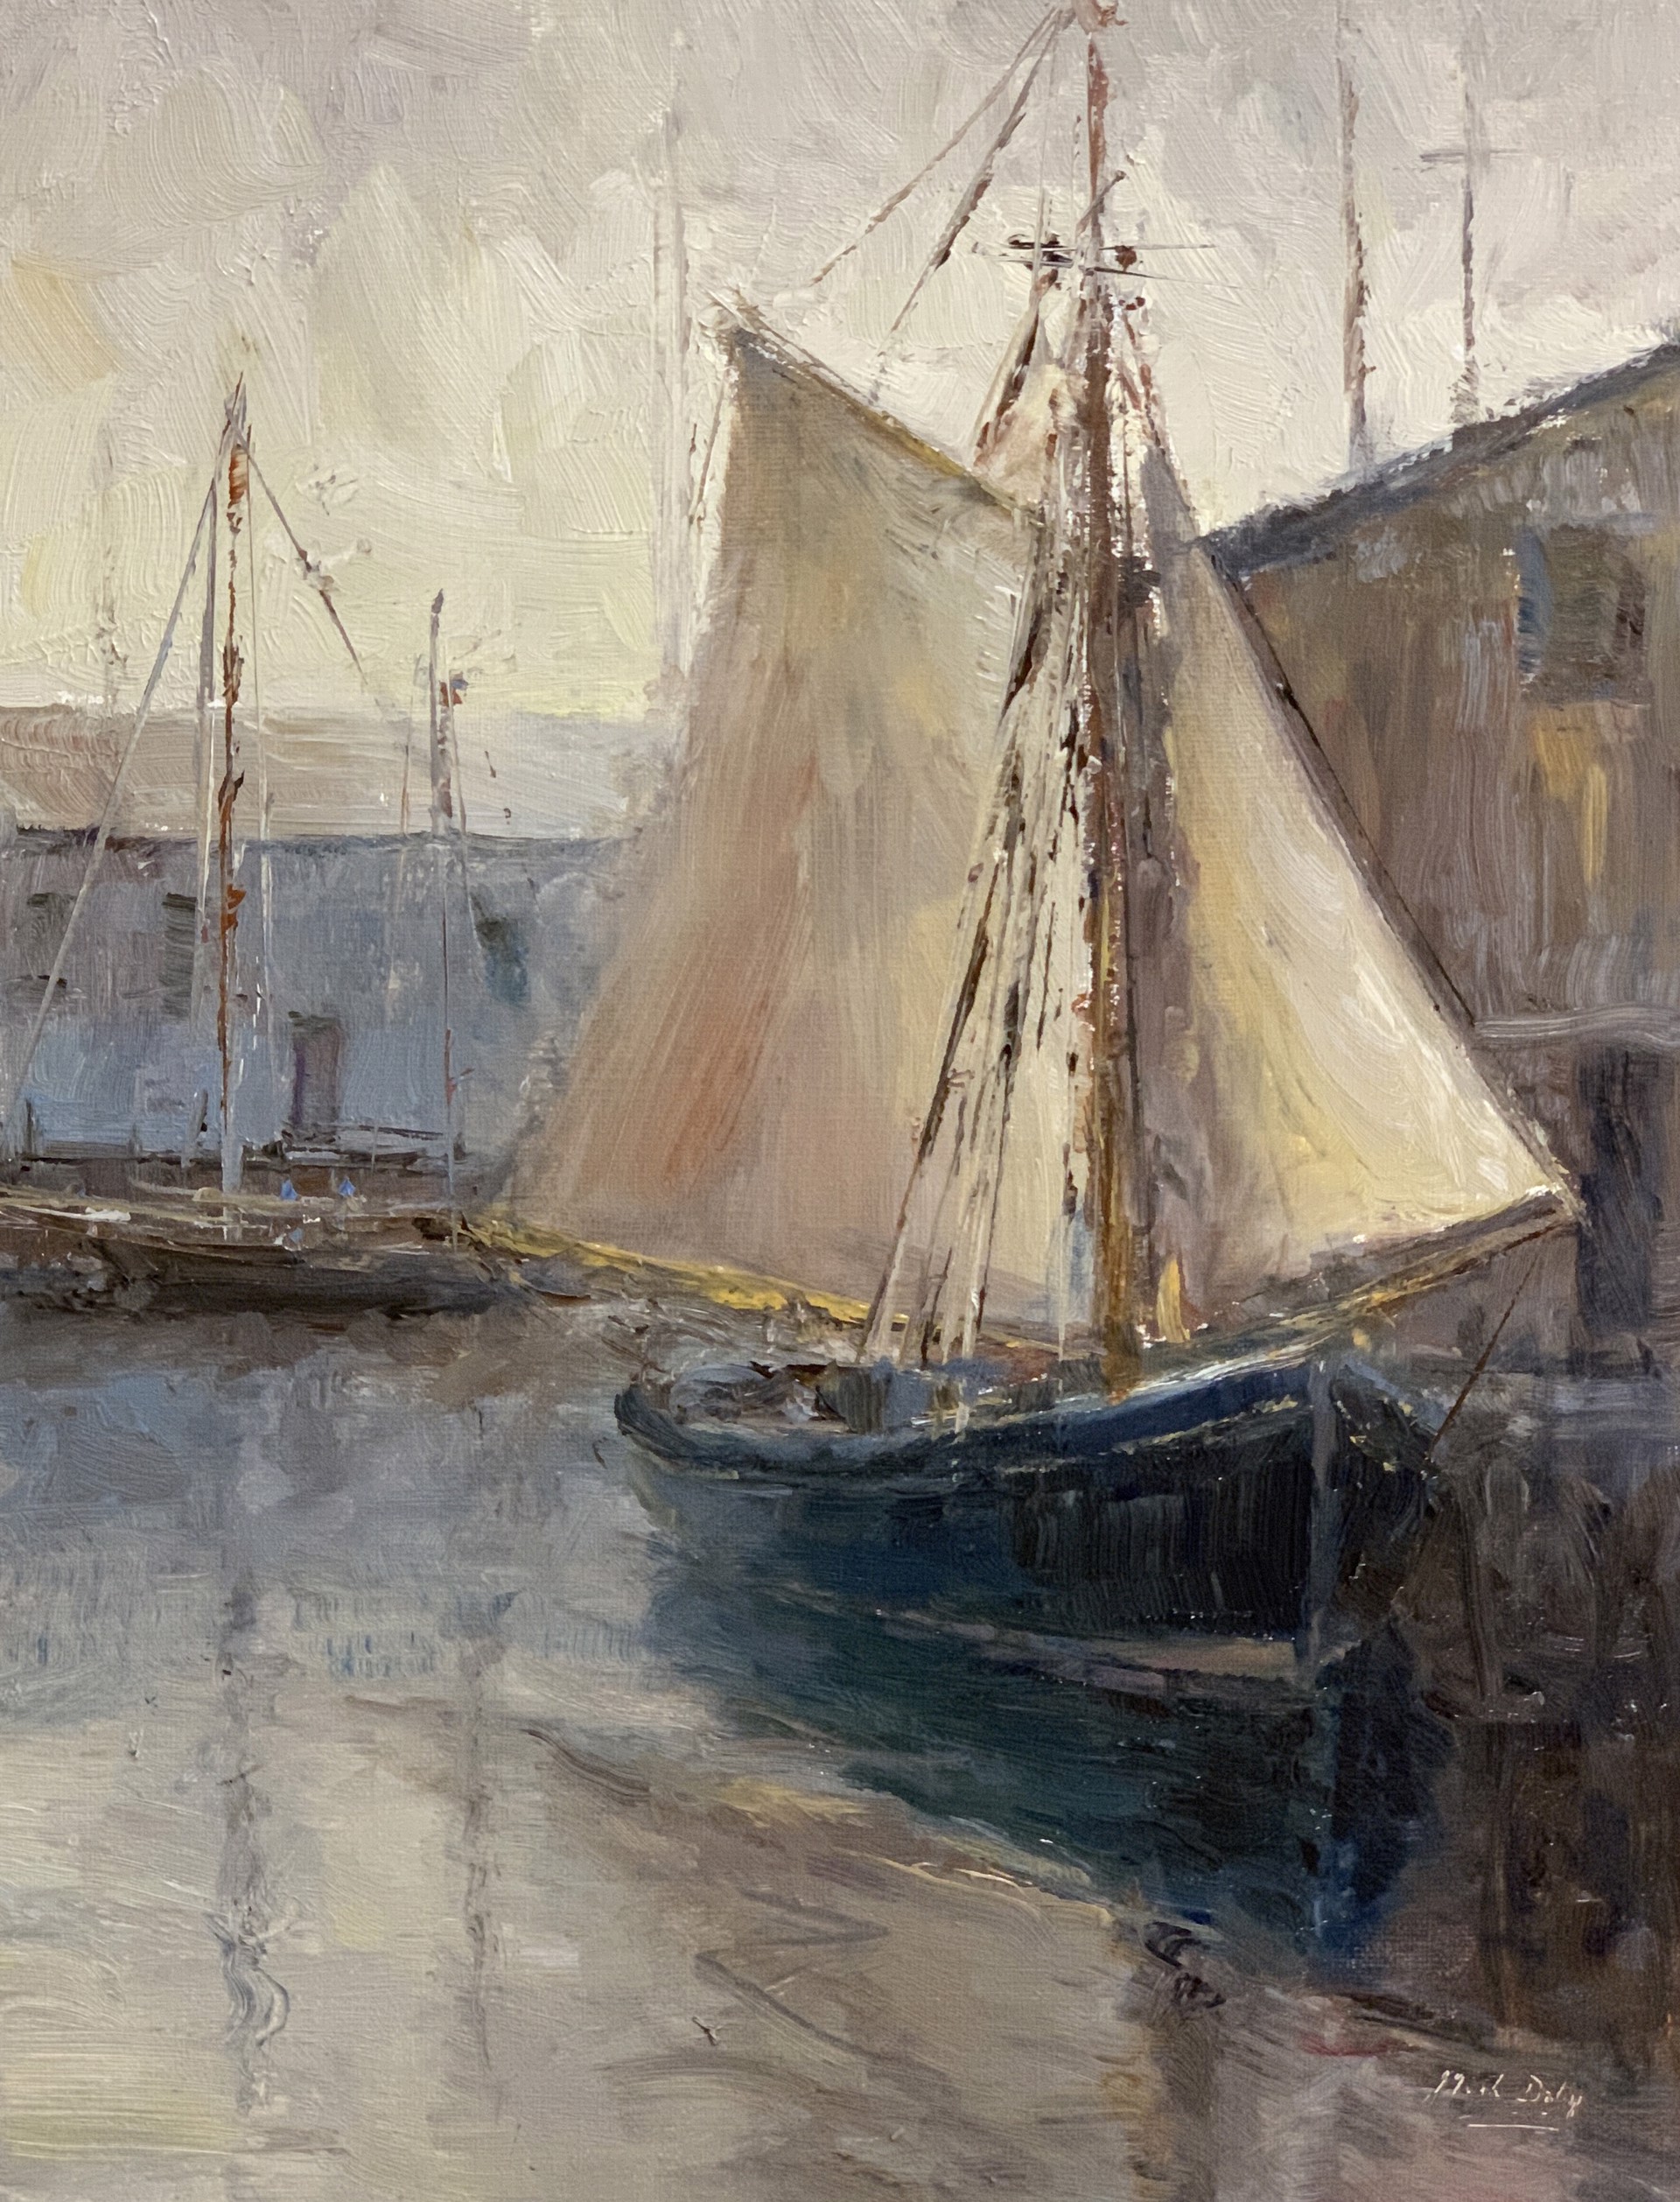 Drying Sails by Mark Daly